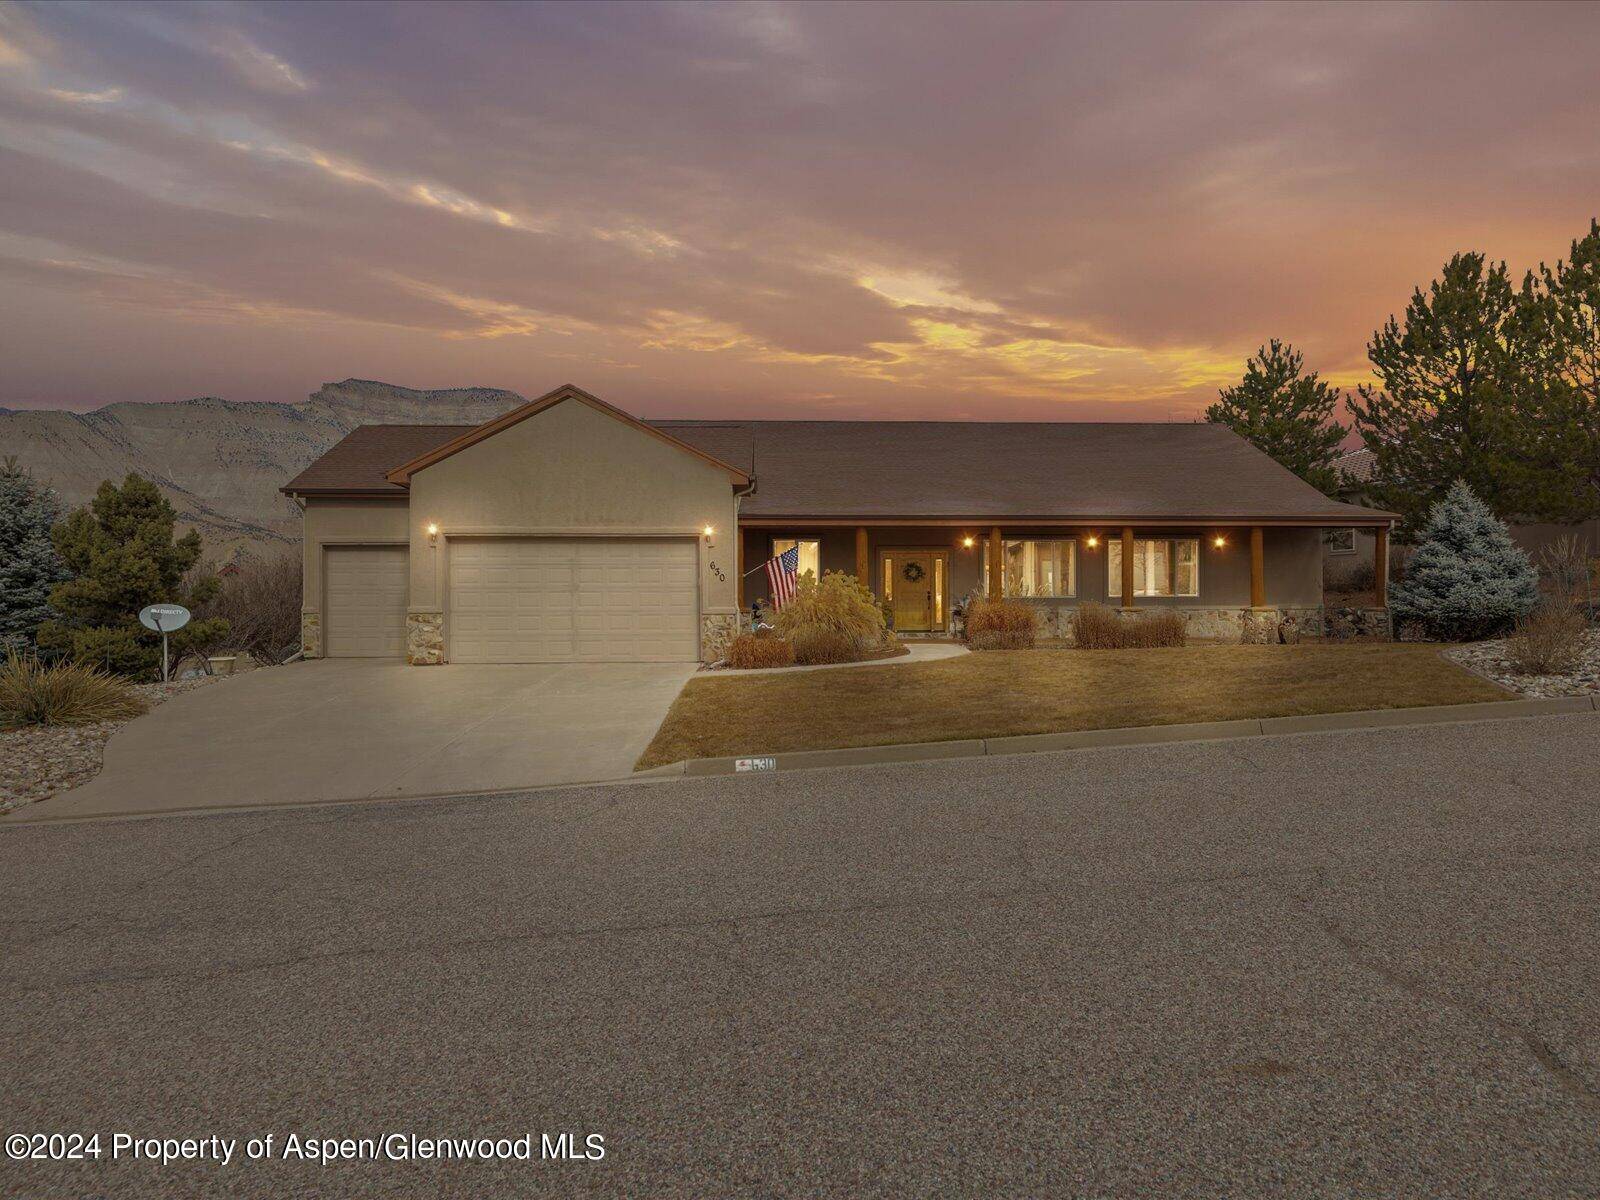 Huge Price Reduction makes this stunning ranch style home an exceptional value !